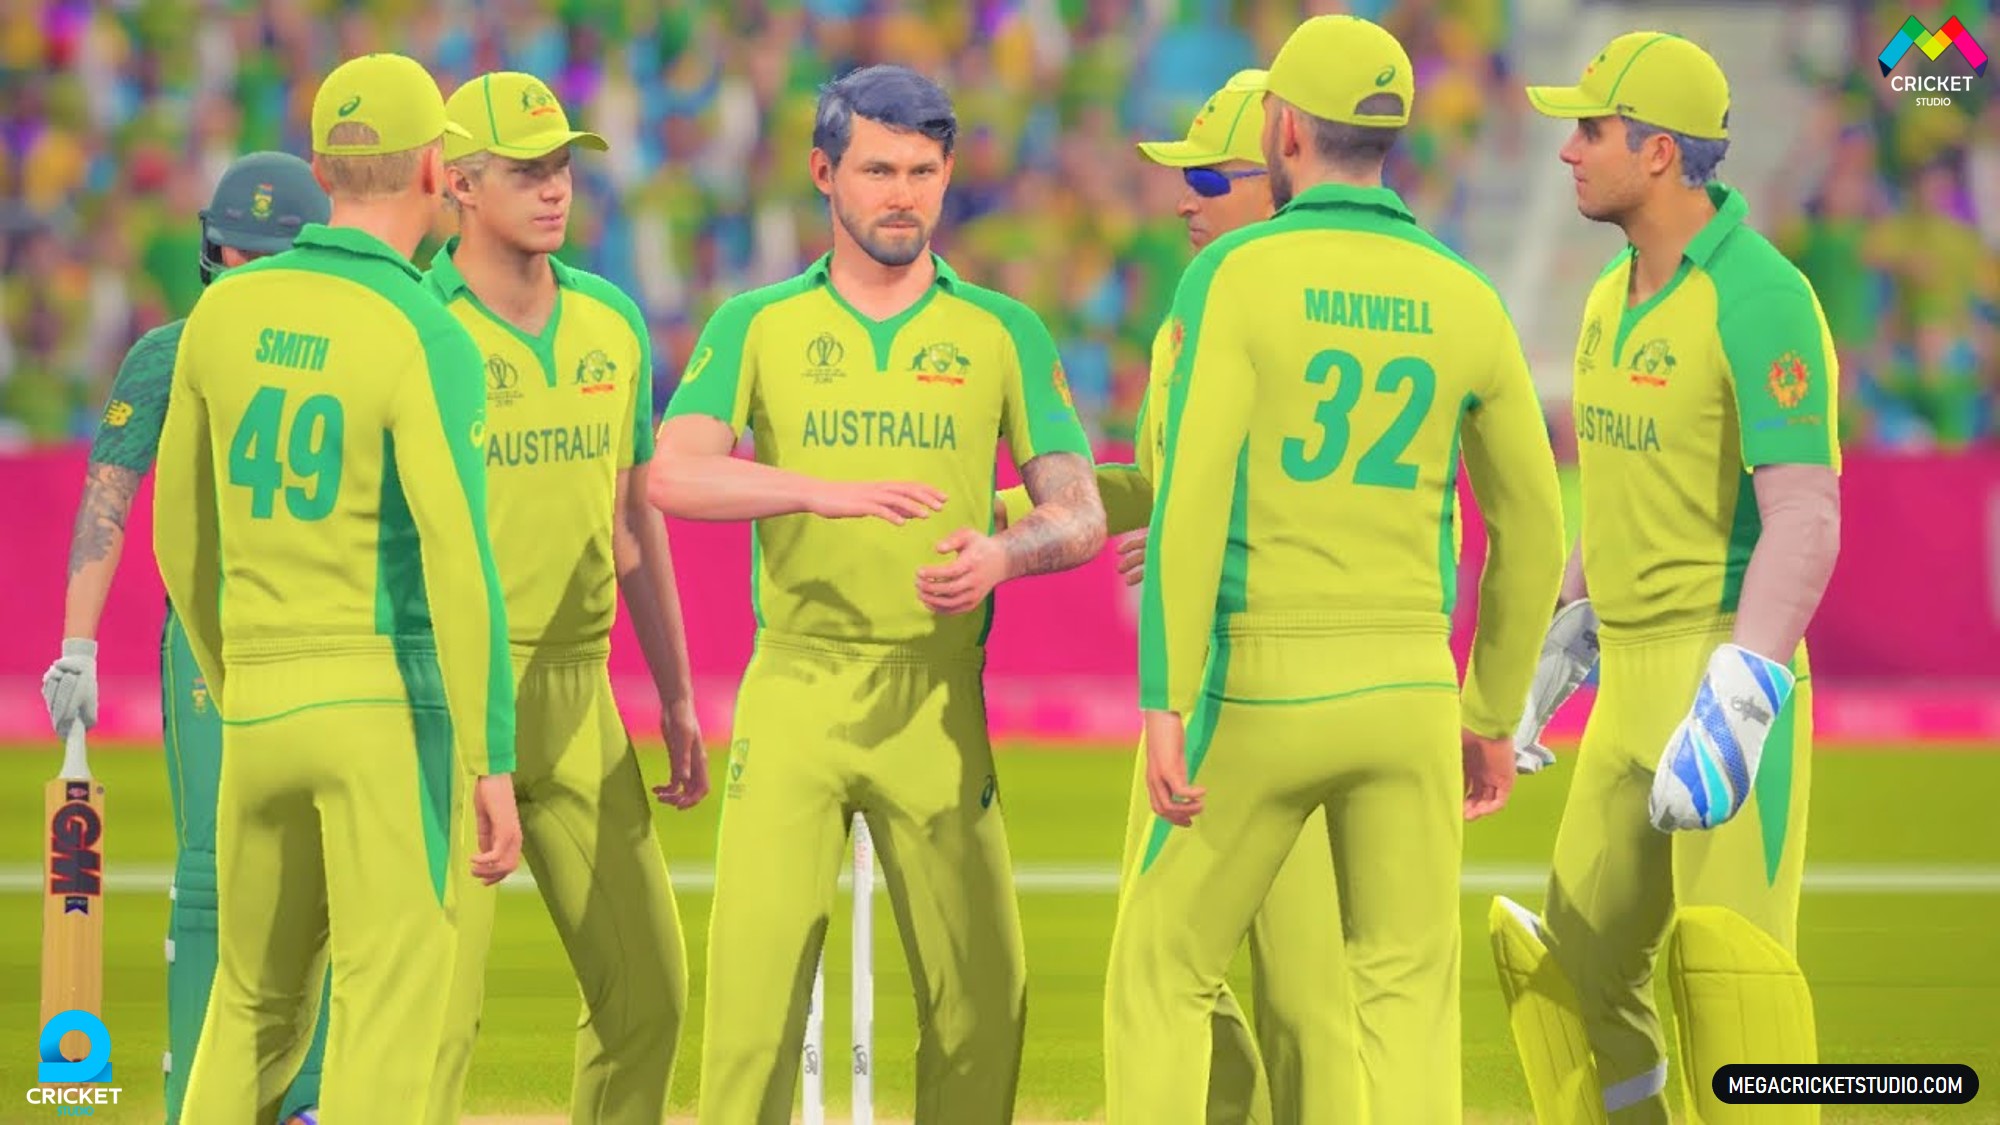 cricket games for pc free download full version 2019